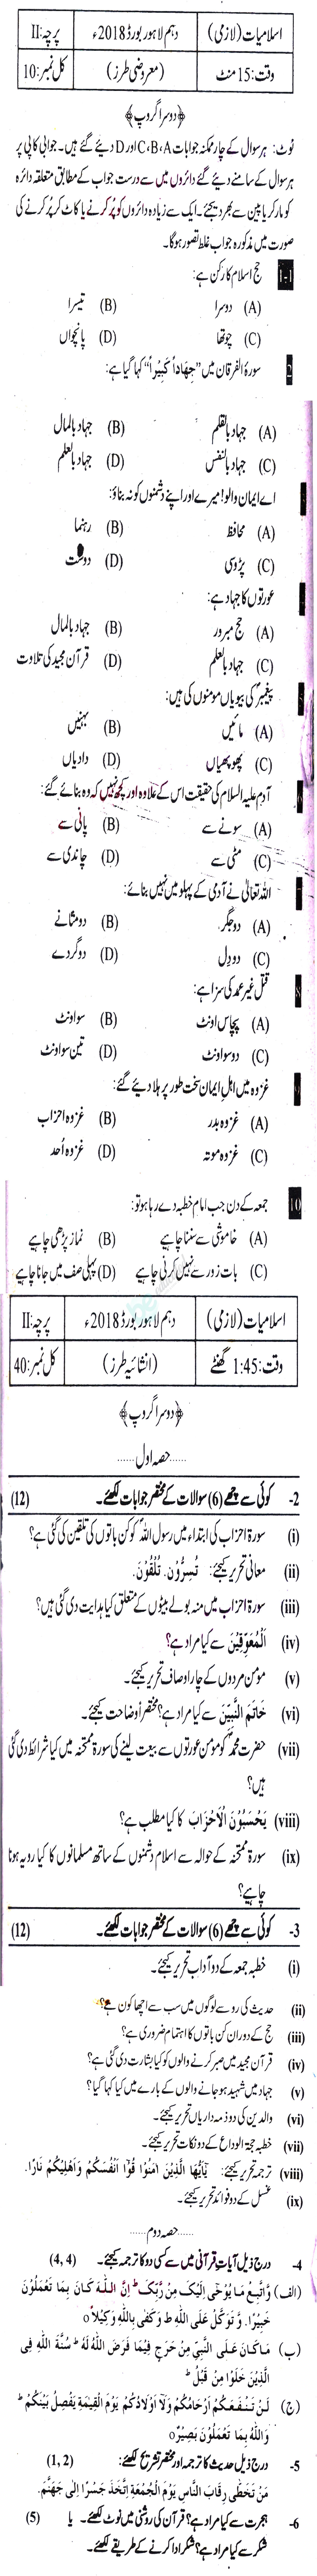 Islamiat (Compulsory) 10th class Past Paper Group 2 BISE Lahore 2018